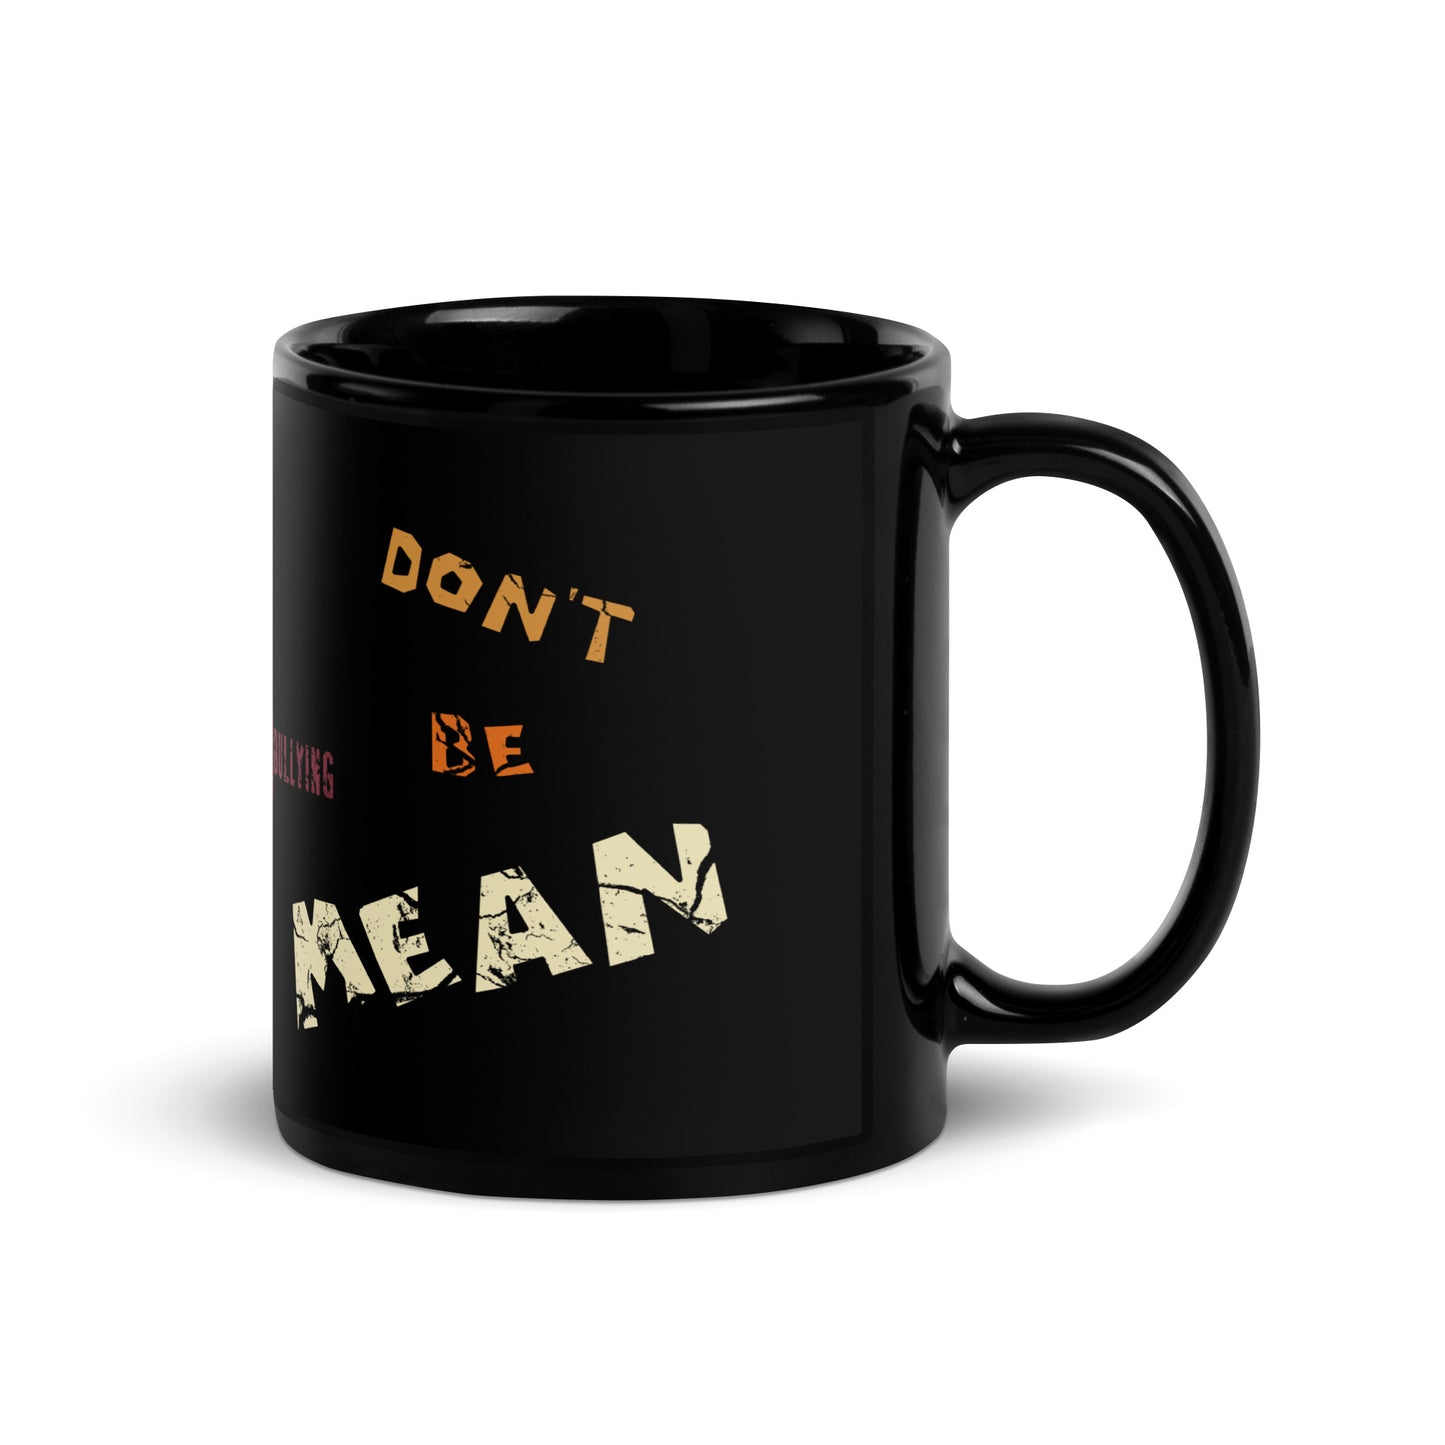 A001 Mug - Black Glossy Ceramic Mug Featuring Stop-Hand Graphic with text “Abortion is Mean. Don’t be Mean.”